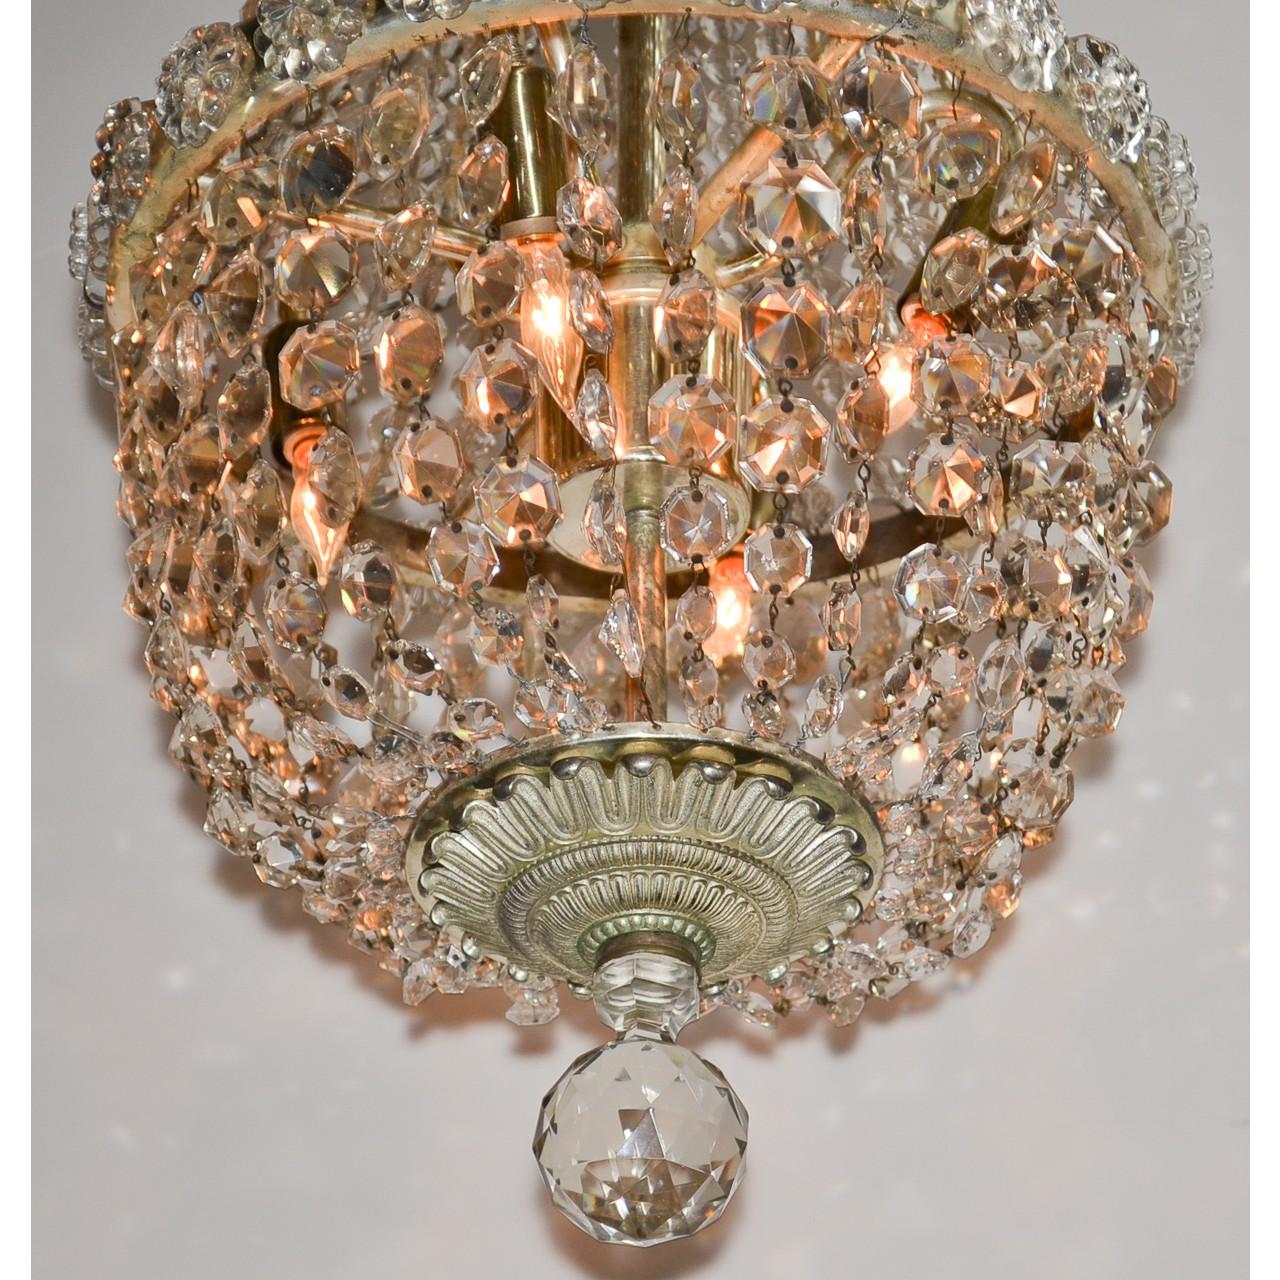 Gorgeous small scaled French bronze and crystal chandelier with a foliate motif cast bronze canopy above multiple strands of faceted bead crystals leading to a central band of crystal flower-head accents. The basket with larger draped bead crystal